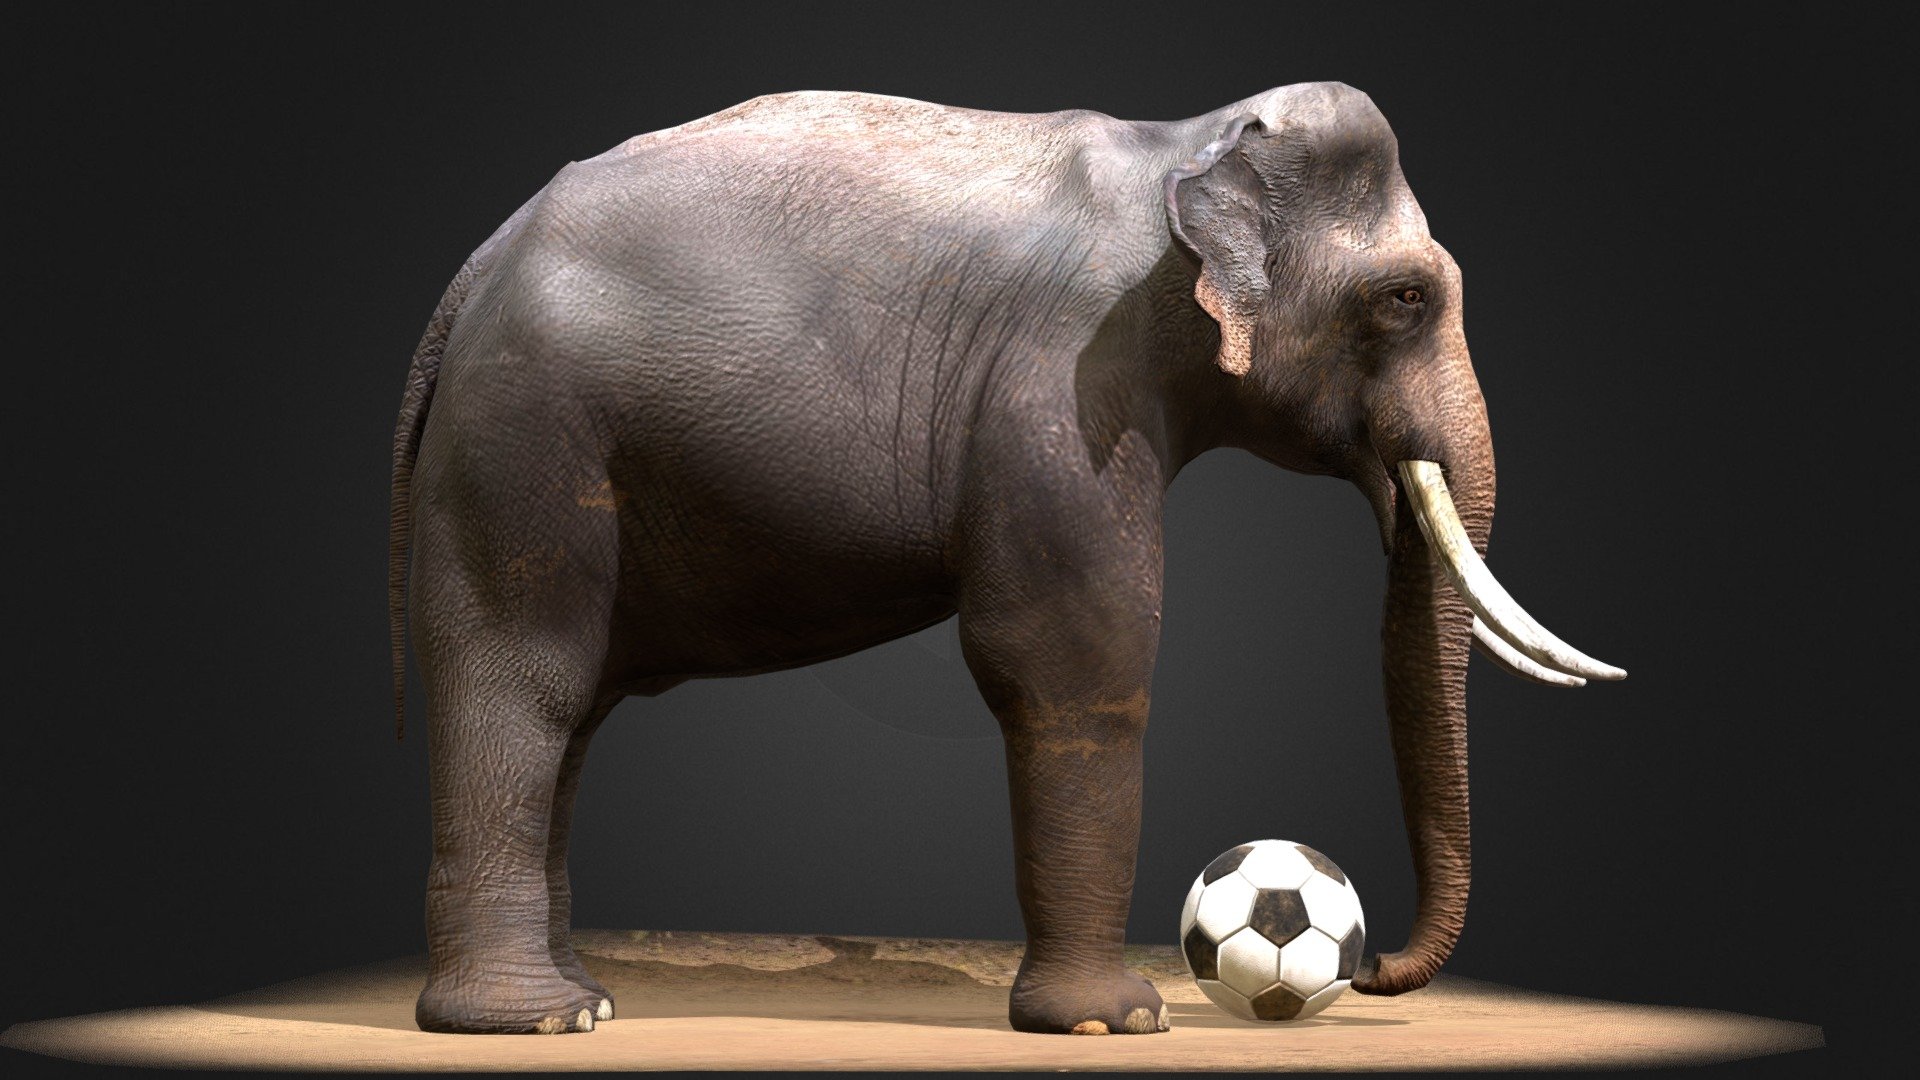 Model: Created in 3dsmax.

Textute: real photos of elephant plus Substance Painter.

Polycount: 6300 polygons.

UV: full, no overlapse

Anyone care, please do not hesitate to contact me at:
ducdm69@gmail.com - Asian Male Elephant 3D Model ( In Viet Nam) - 3D model by Đức Đào Minh (@dmd_hn) 3d model